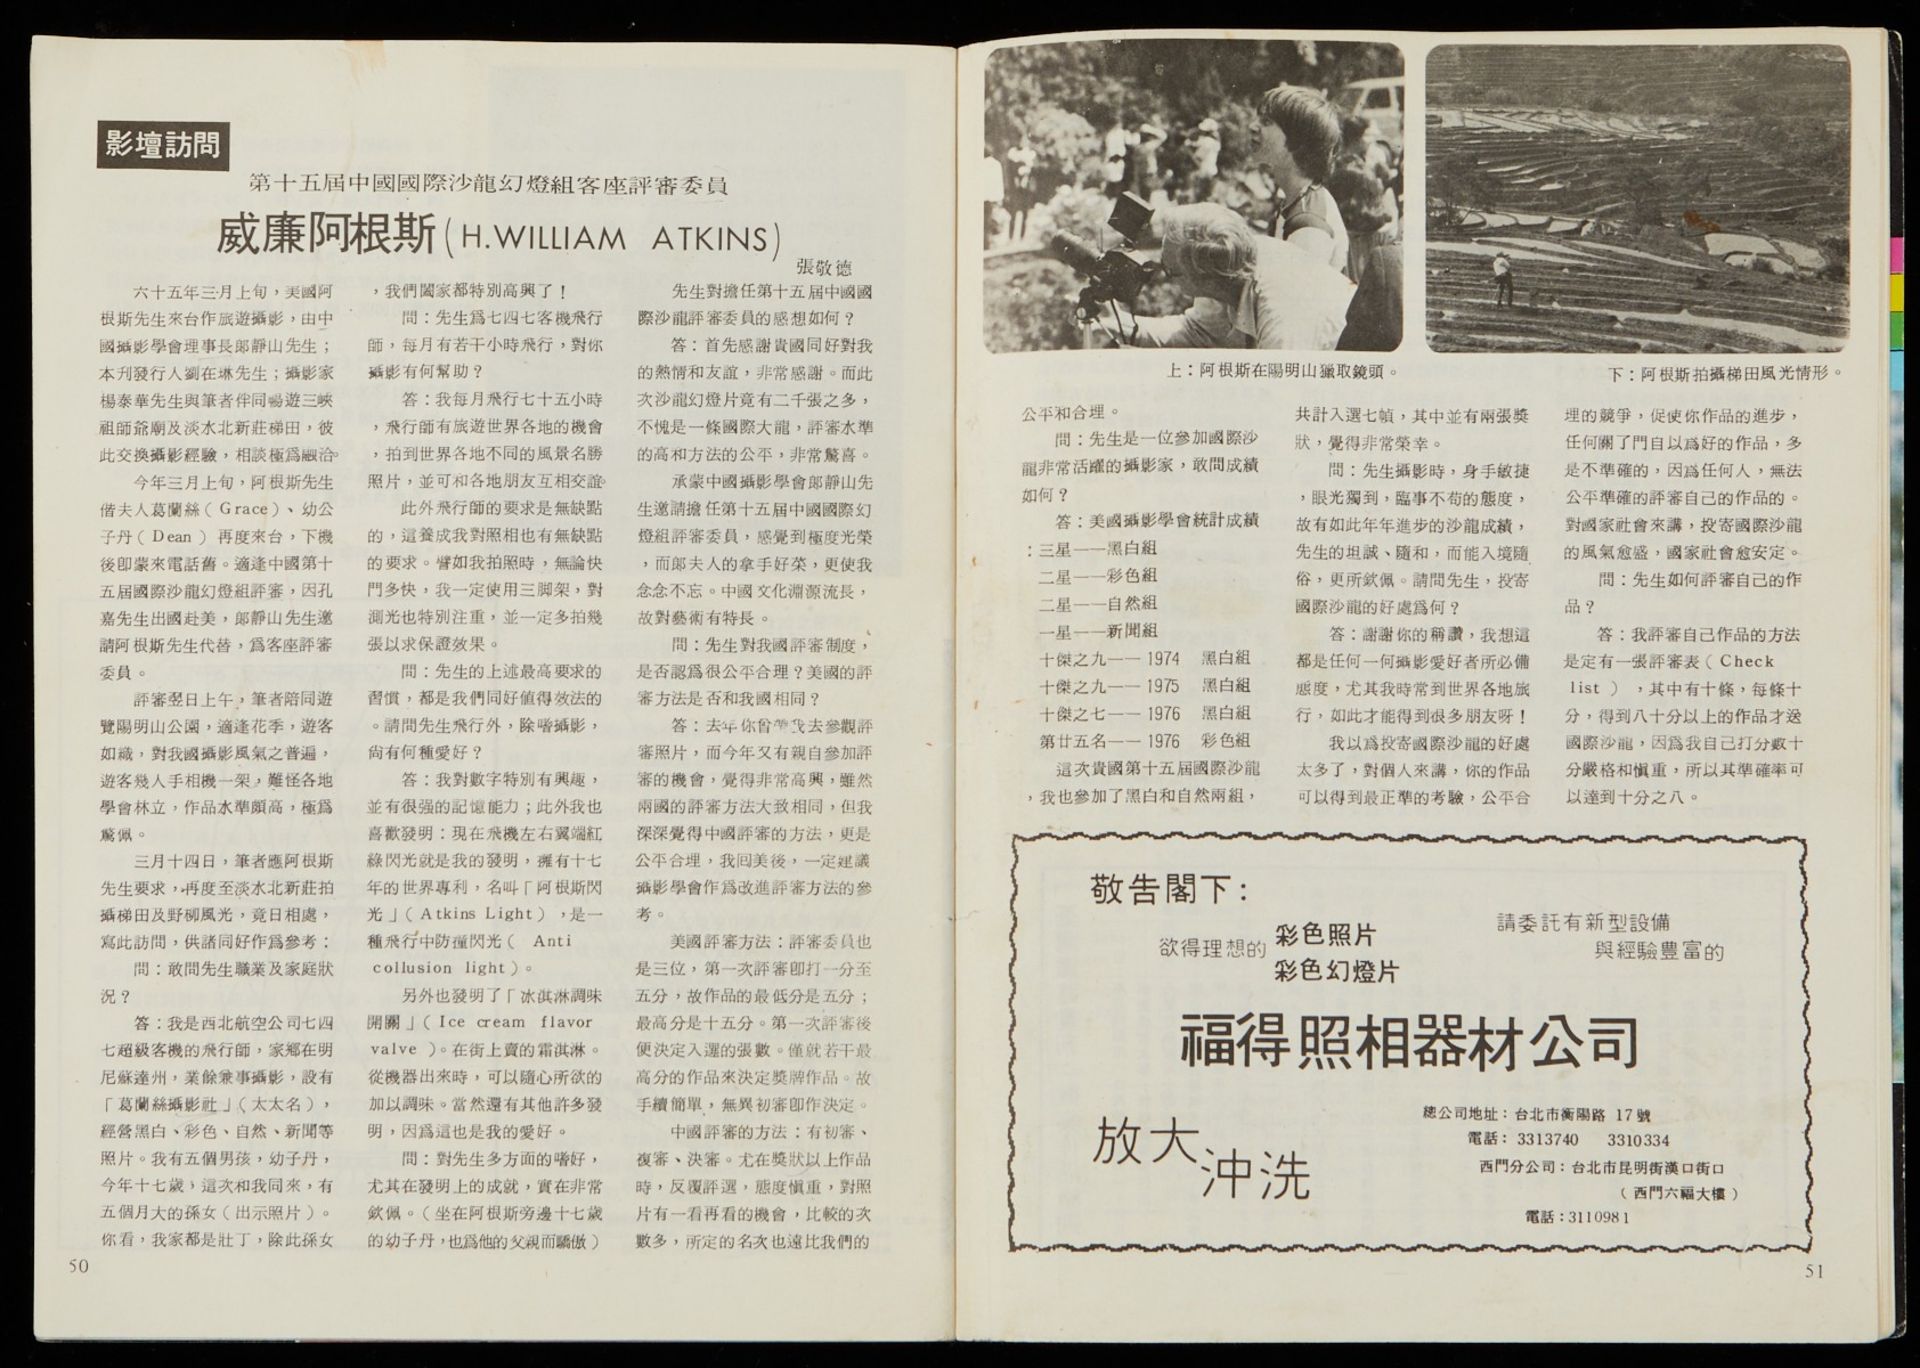 Photo Works of Chin San Long & Atkins Interview - Image 6 of 8